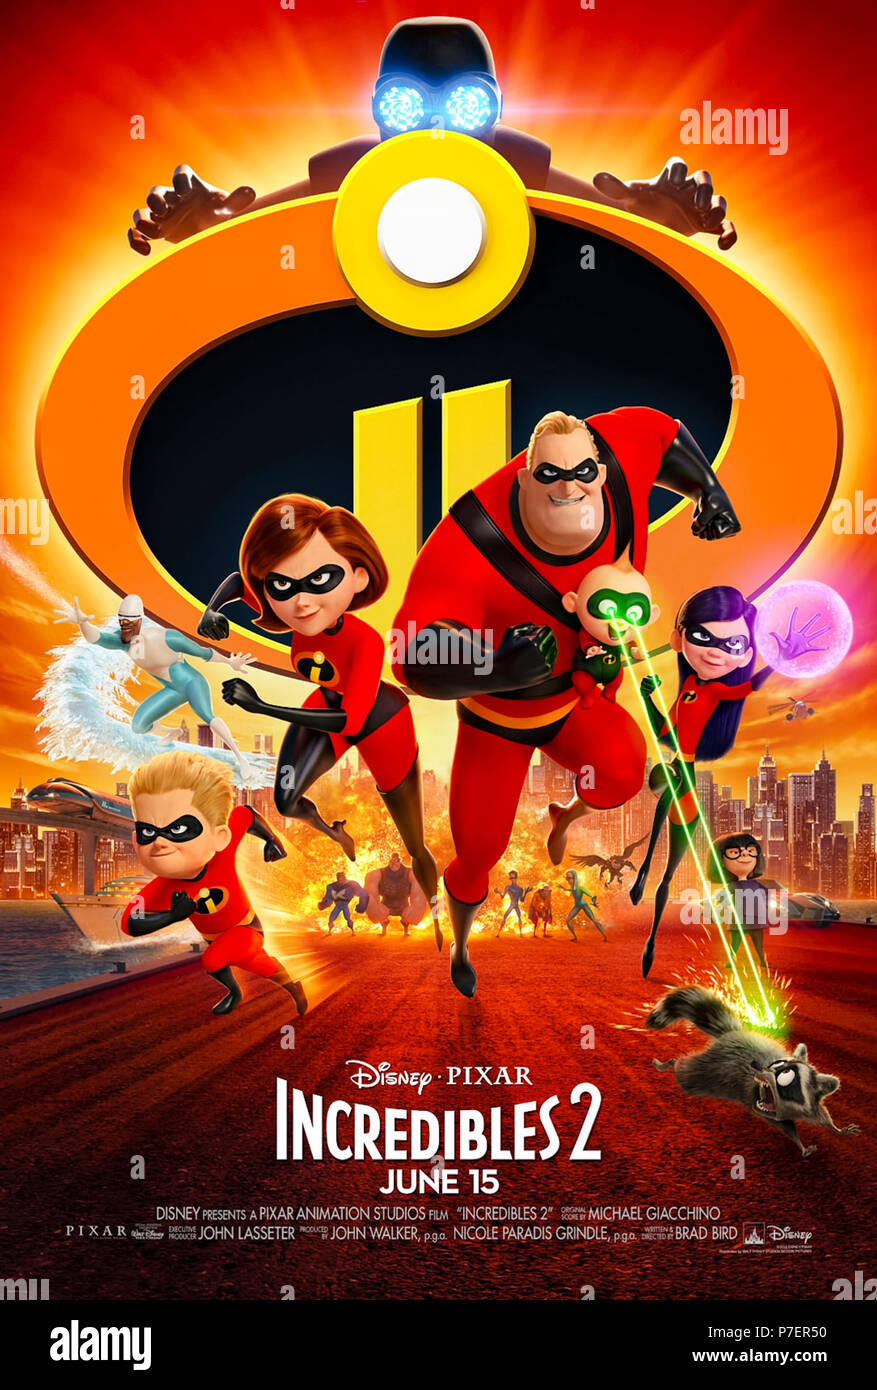 Incredibles 2 (2018) directed by Brad Bird and starring Craig T. Nelson, Holly Hunter, Sarah Vowell and Samuel L. Jackson. The family of superheroes is back and Mr Incredible must meet the greatest challenge of all. Stock Photo